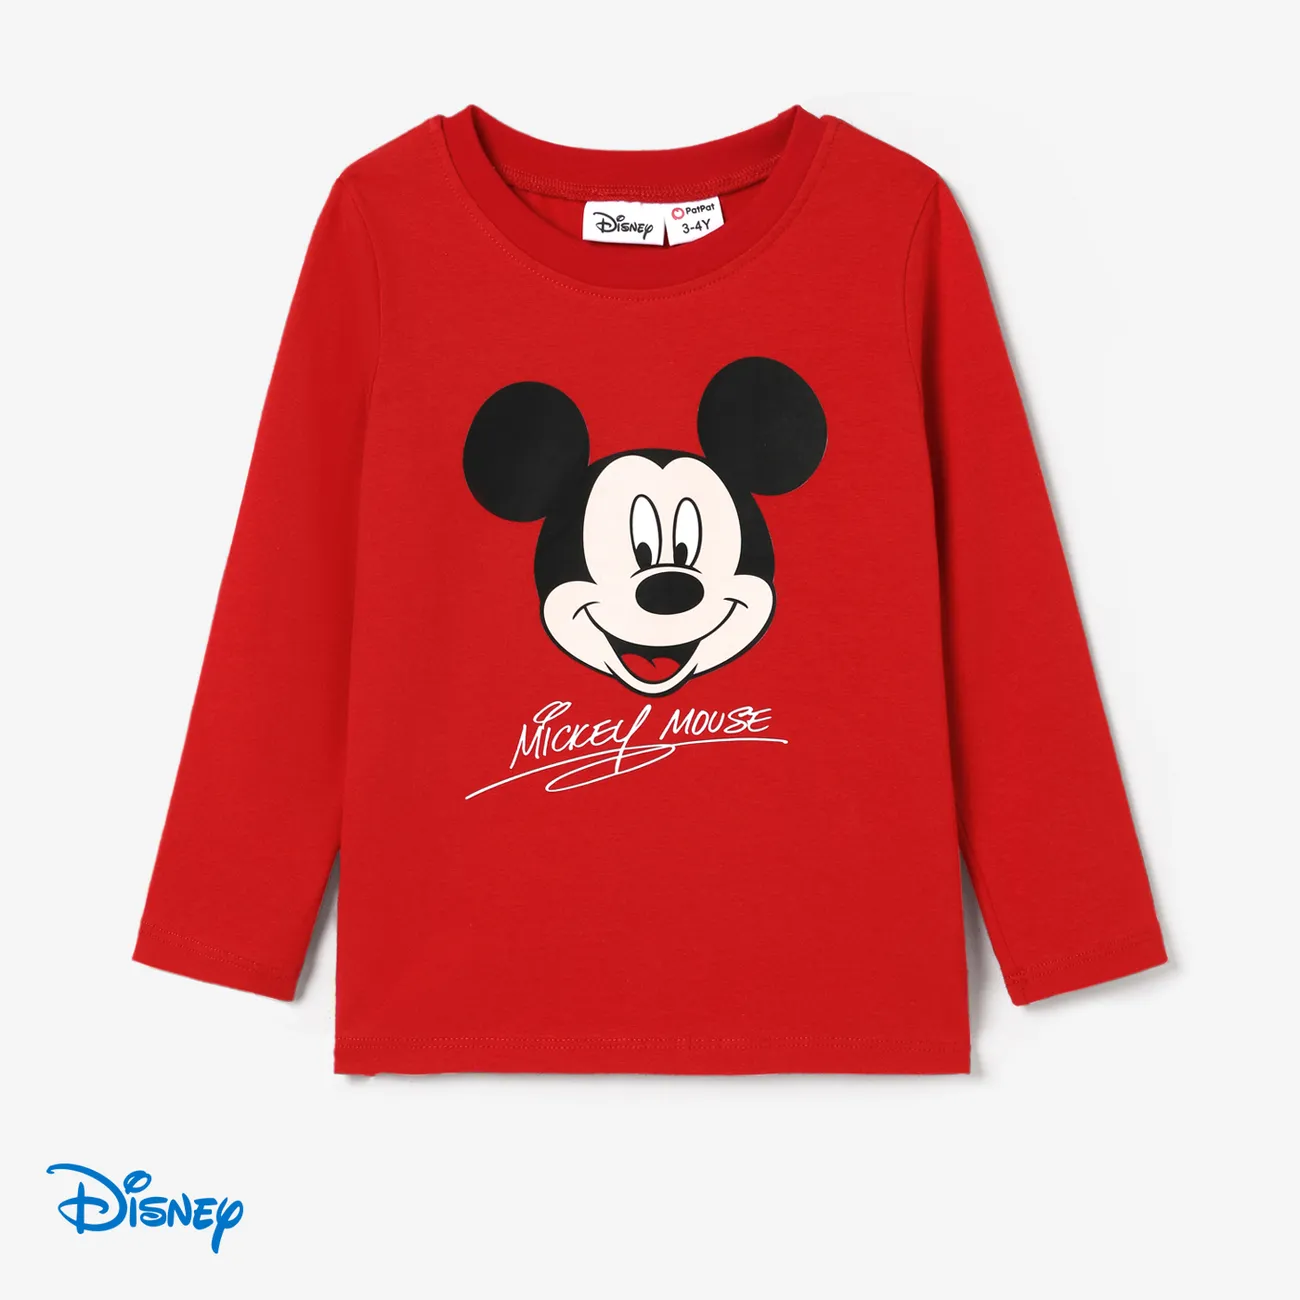 Disney Mickey and Friends Familien-Looks Langärmelig Familien-Outfits Sets rot big image 1